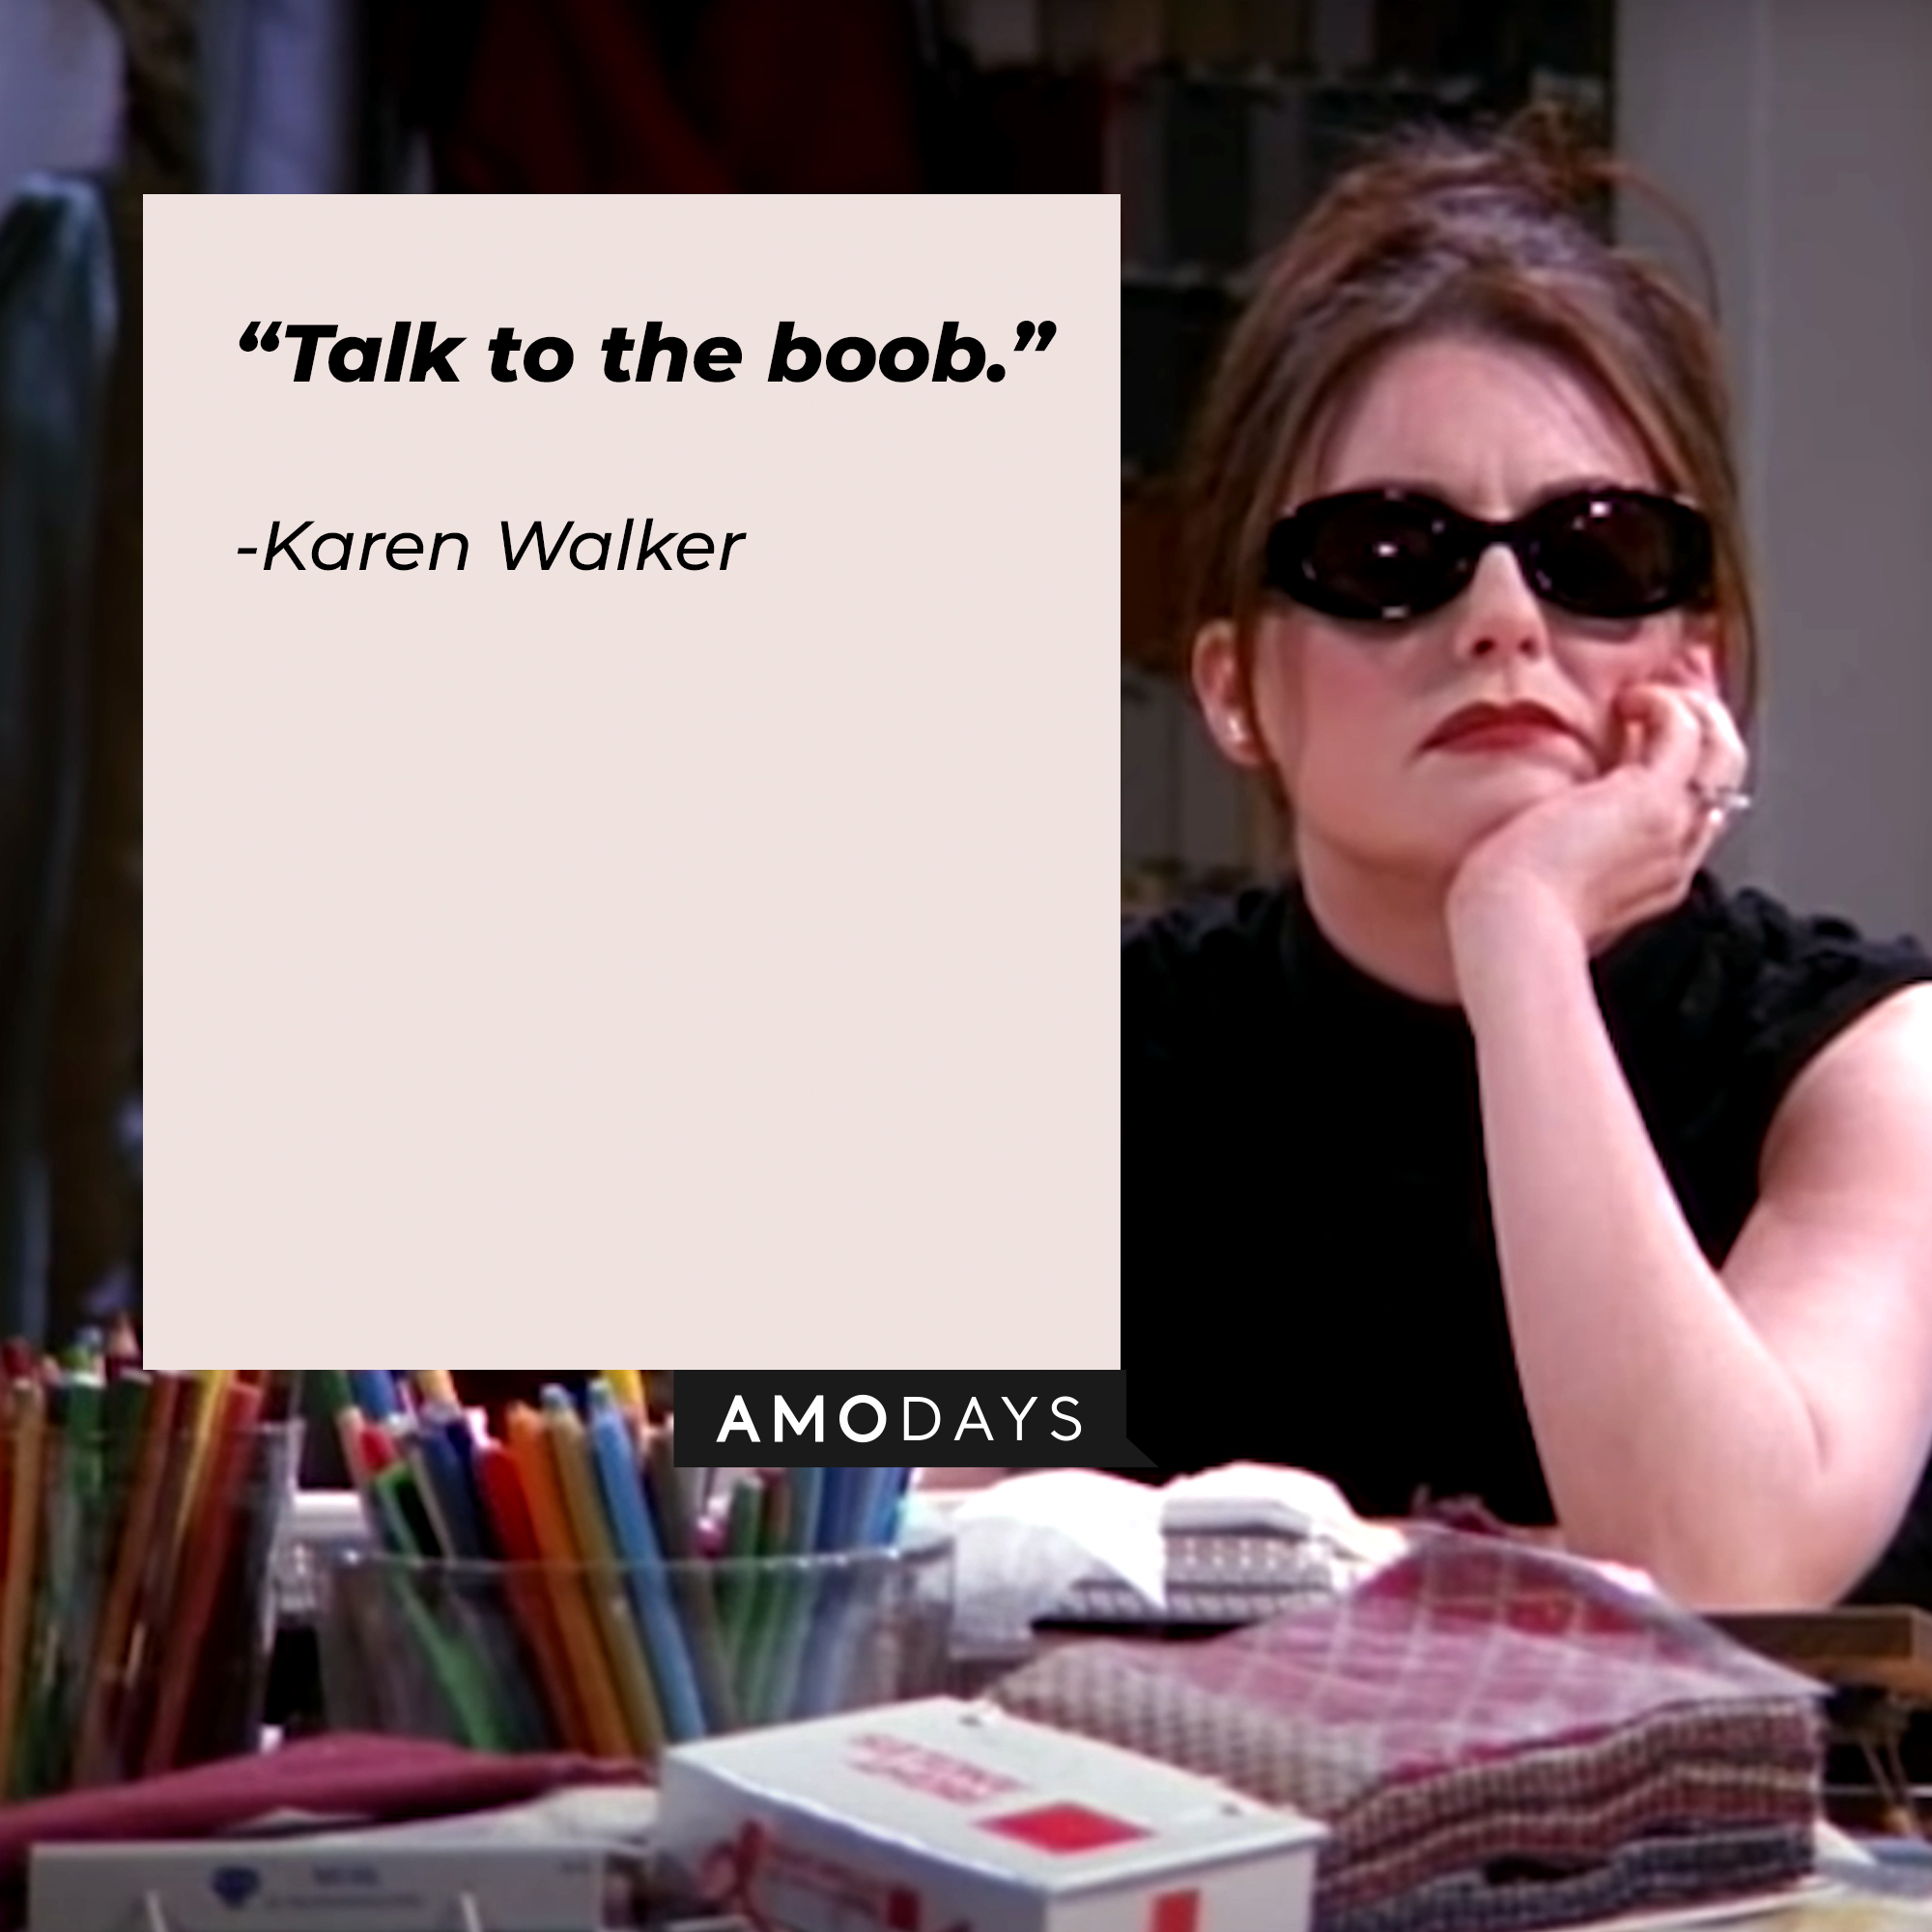 A photo of Karen Walker with the quote, "Talk to the boob." | Source: YouTube/ComedyBites